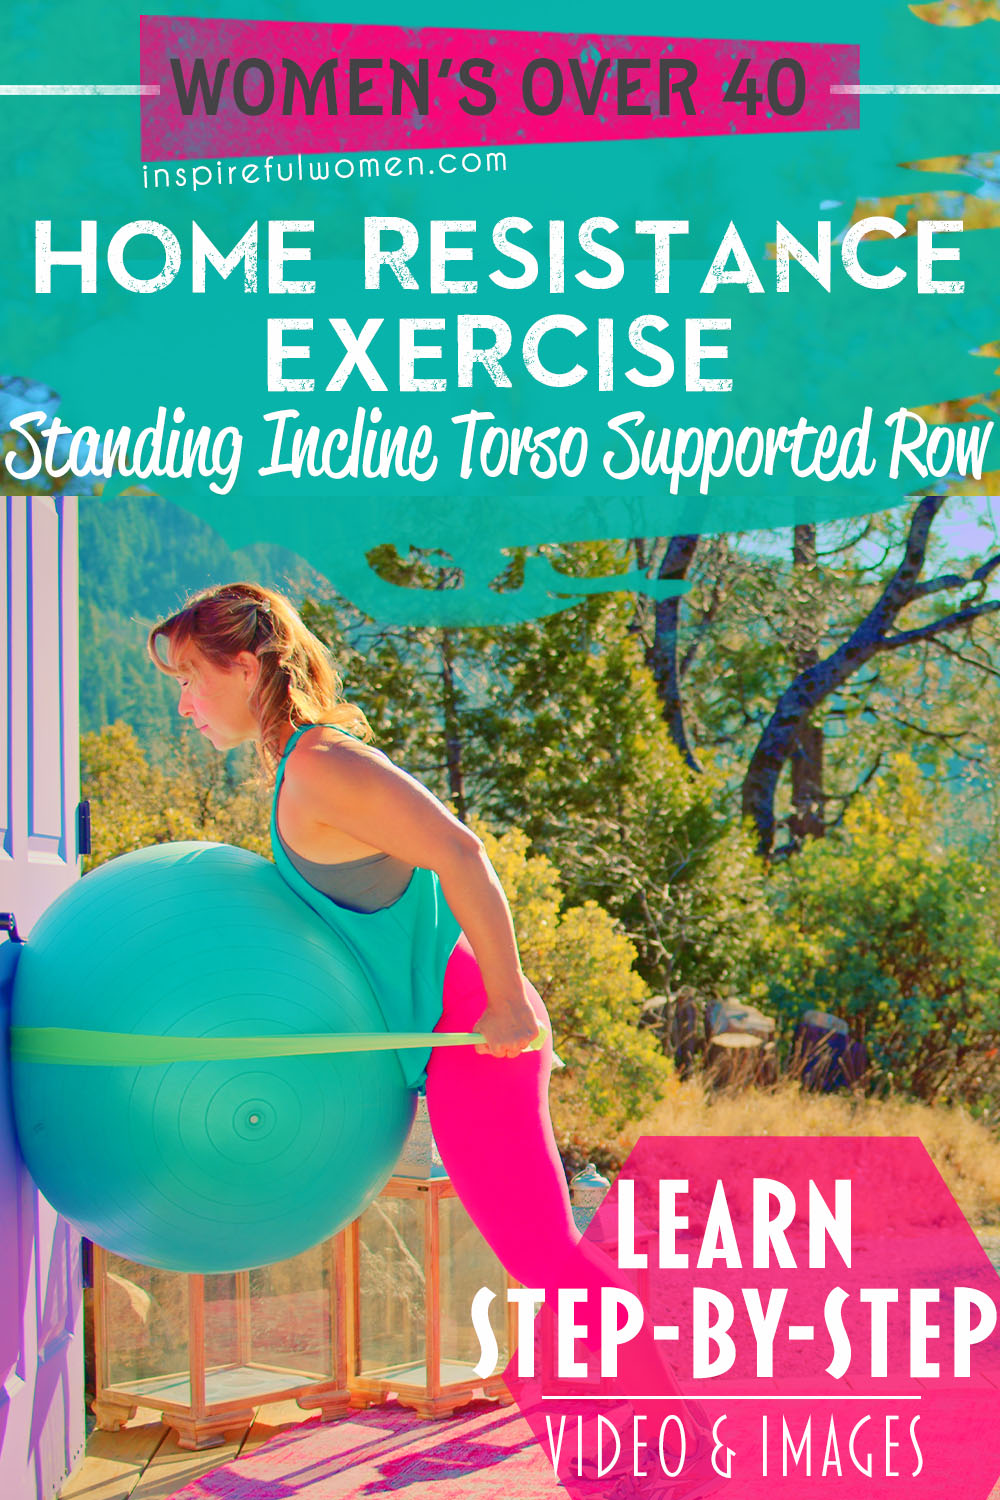 standing-incline-torso-supported-row-on-stability-ball-banded-back-exercise-at-home